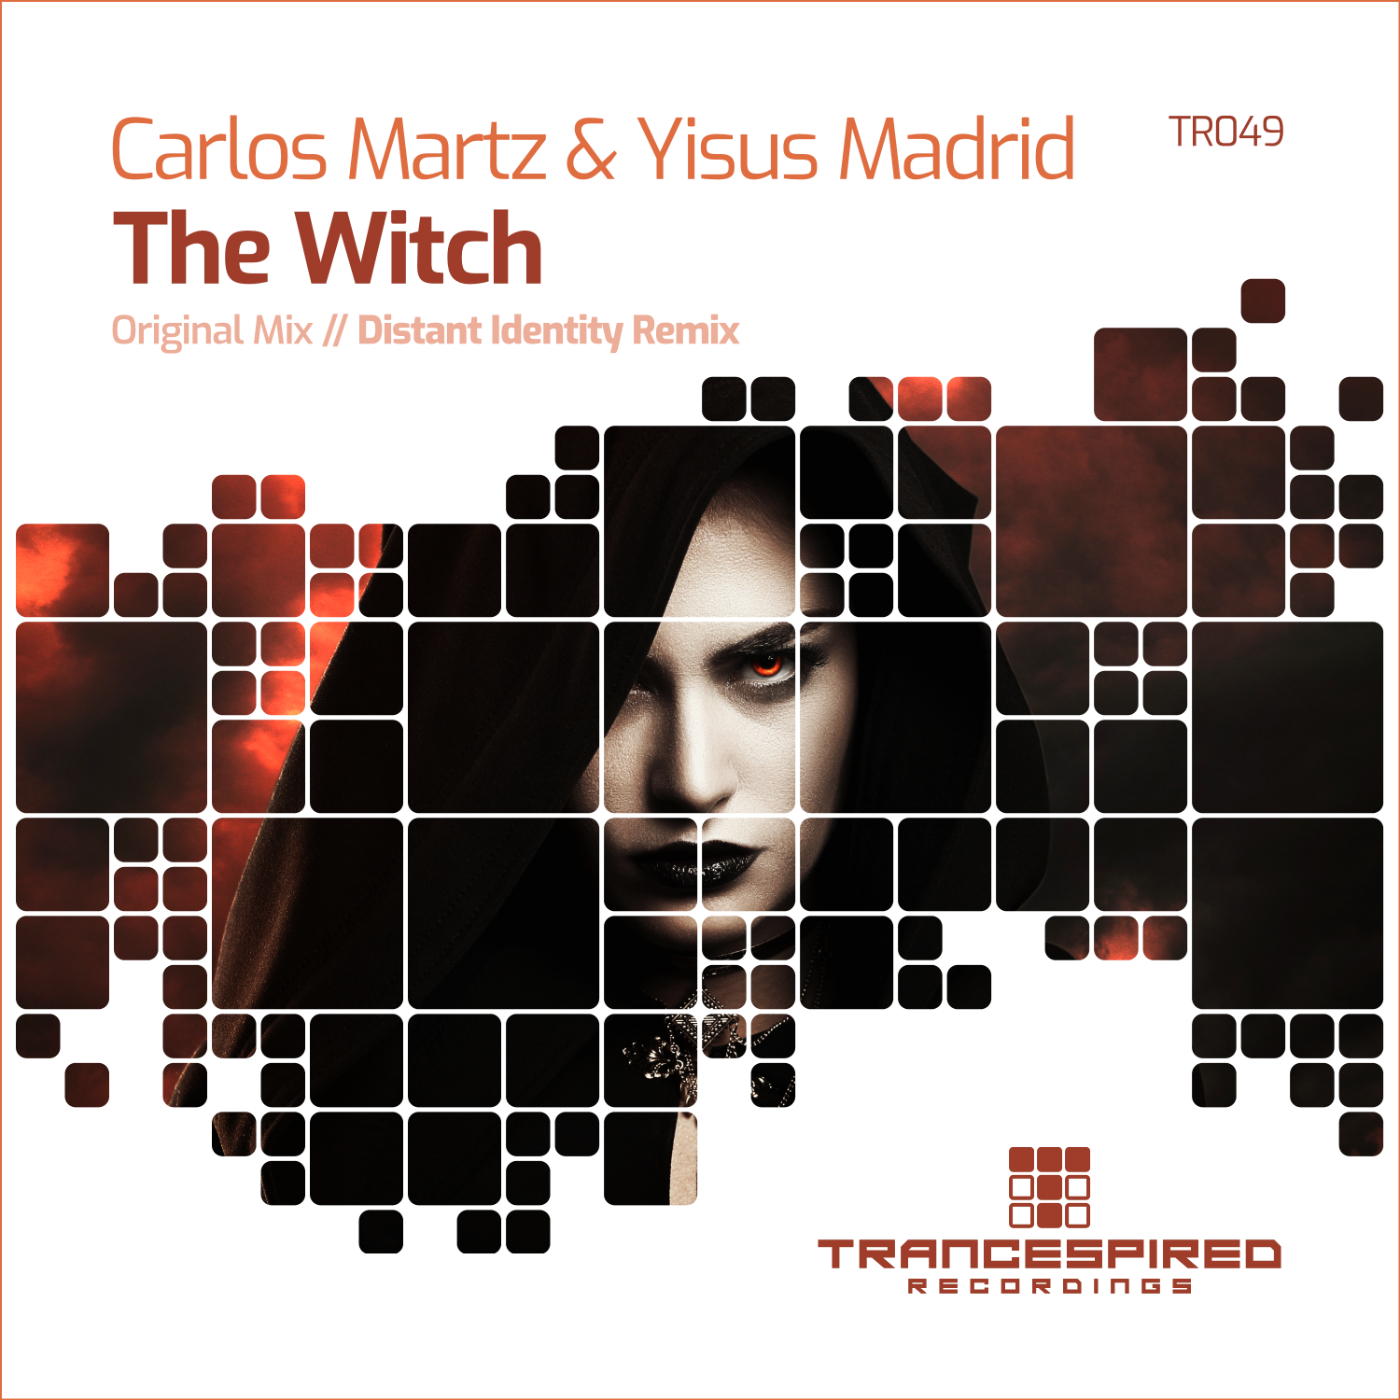 Carlos Martz and Yisus Madrid presents The Witch on Trancespired Recordings